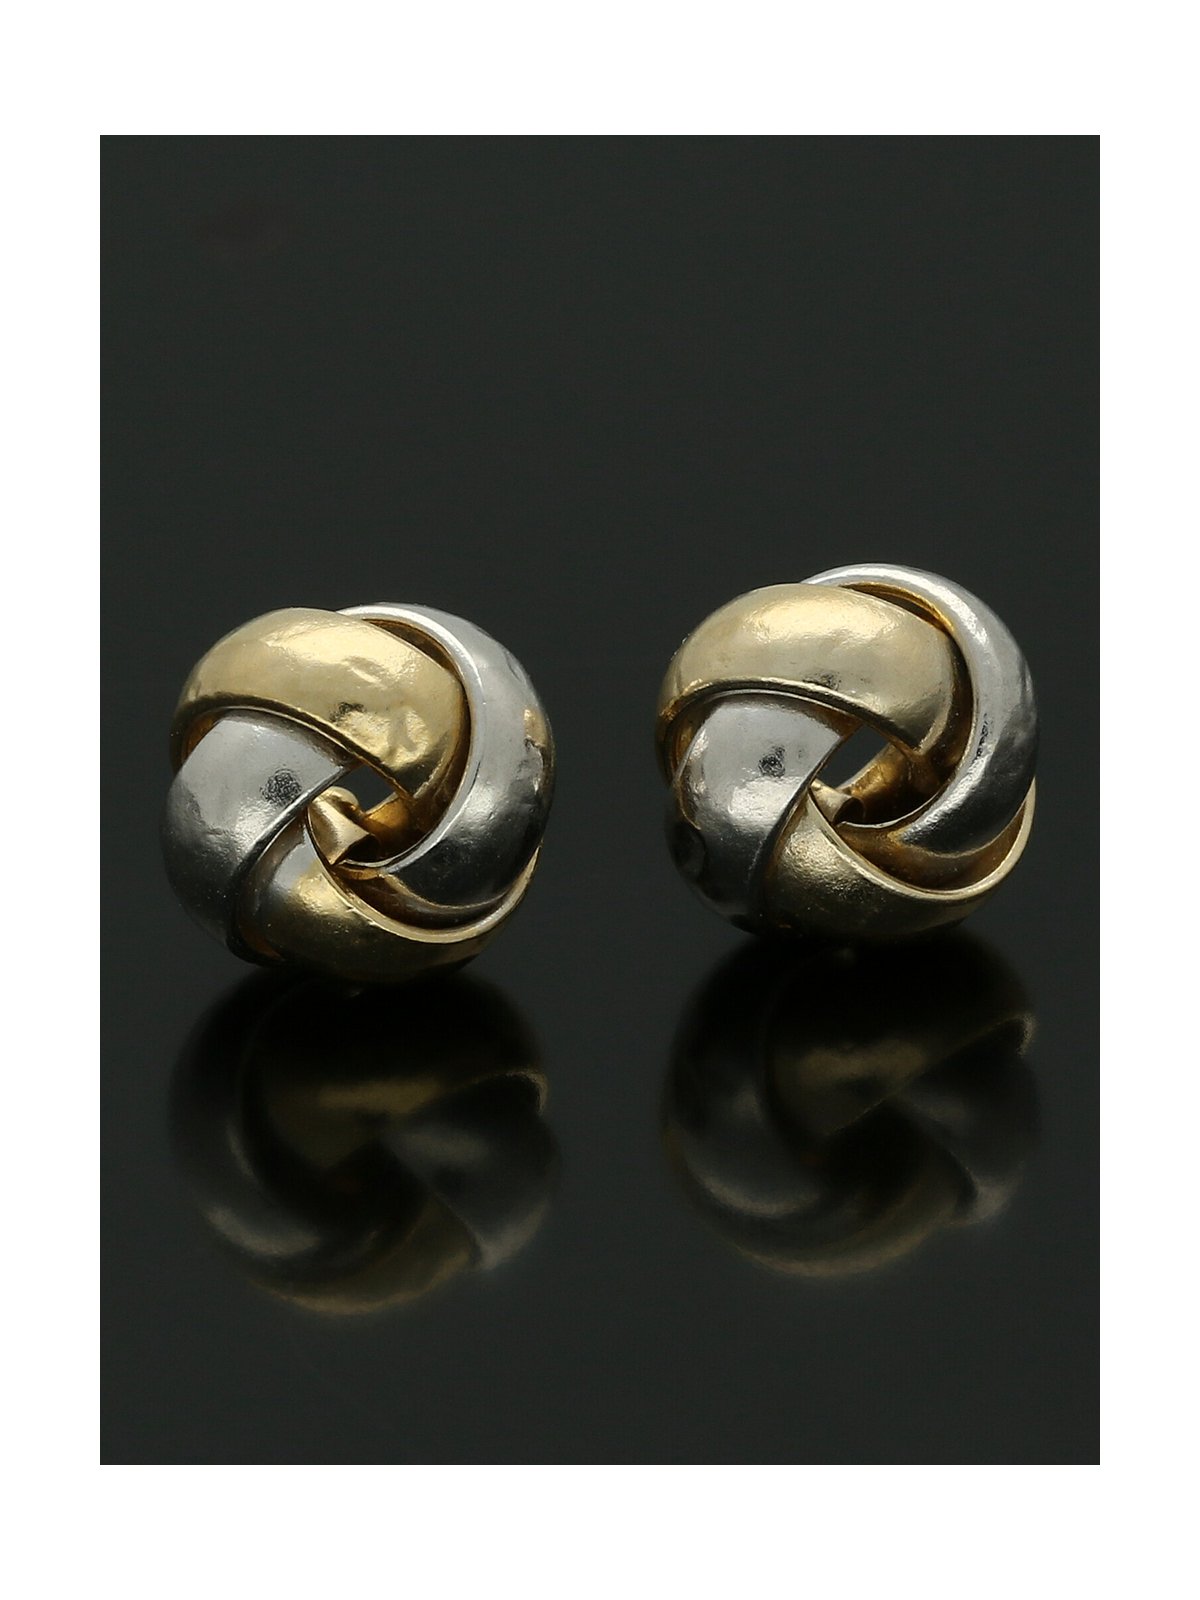 Knot Stud Earrings 8mm in 9ct Yellow & White Gold